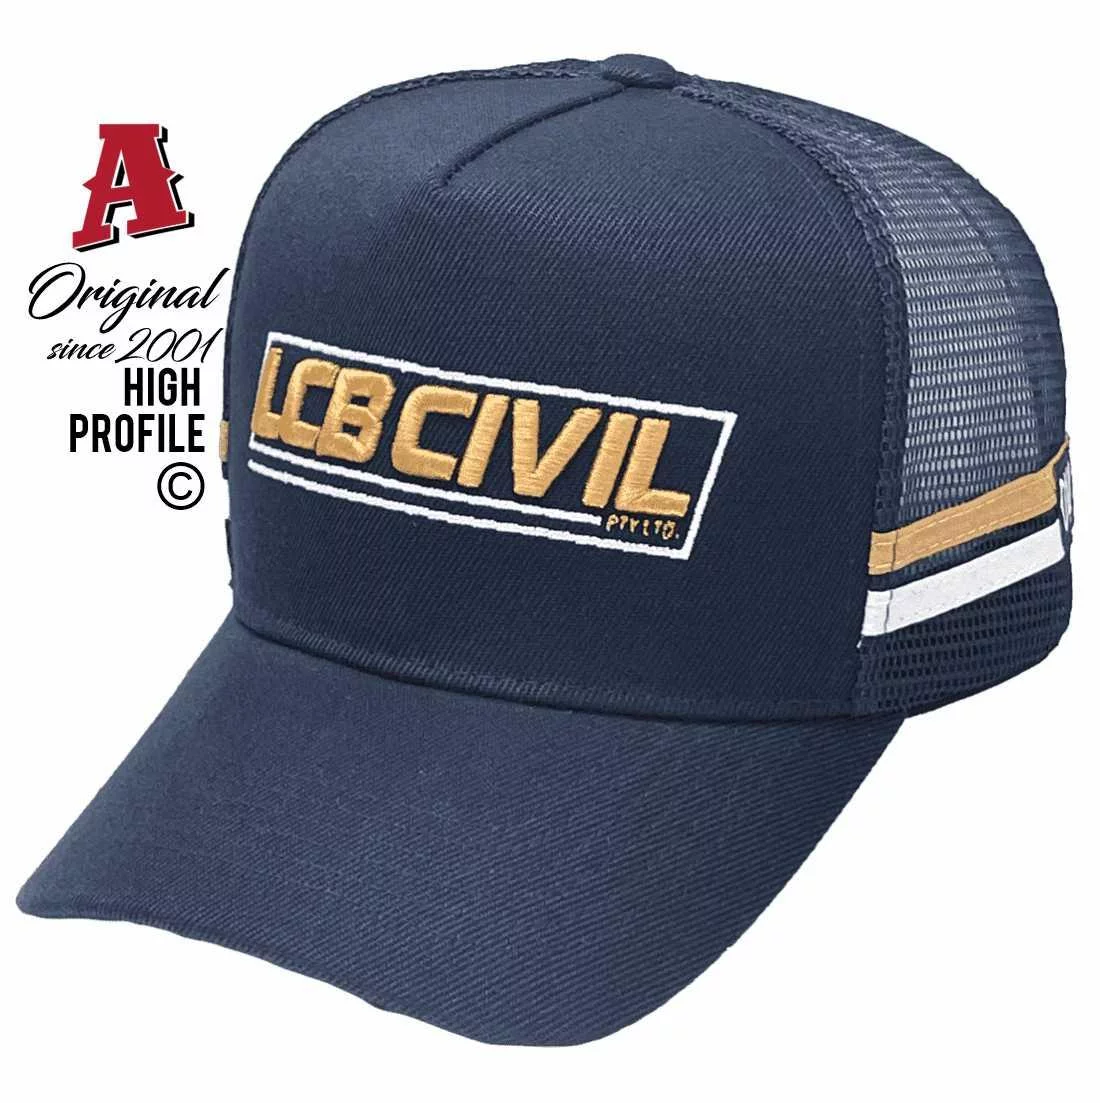 LCB Civil Bundaberg East QLD Basic Aussie Trucker Hats with 2 SideBands 3d embroidery Gold Thread Navy Snapback